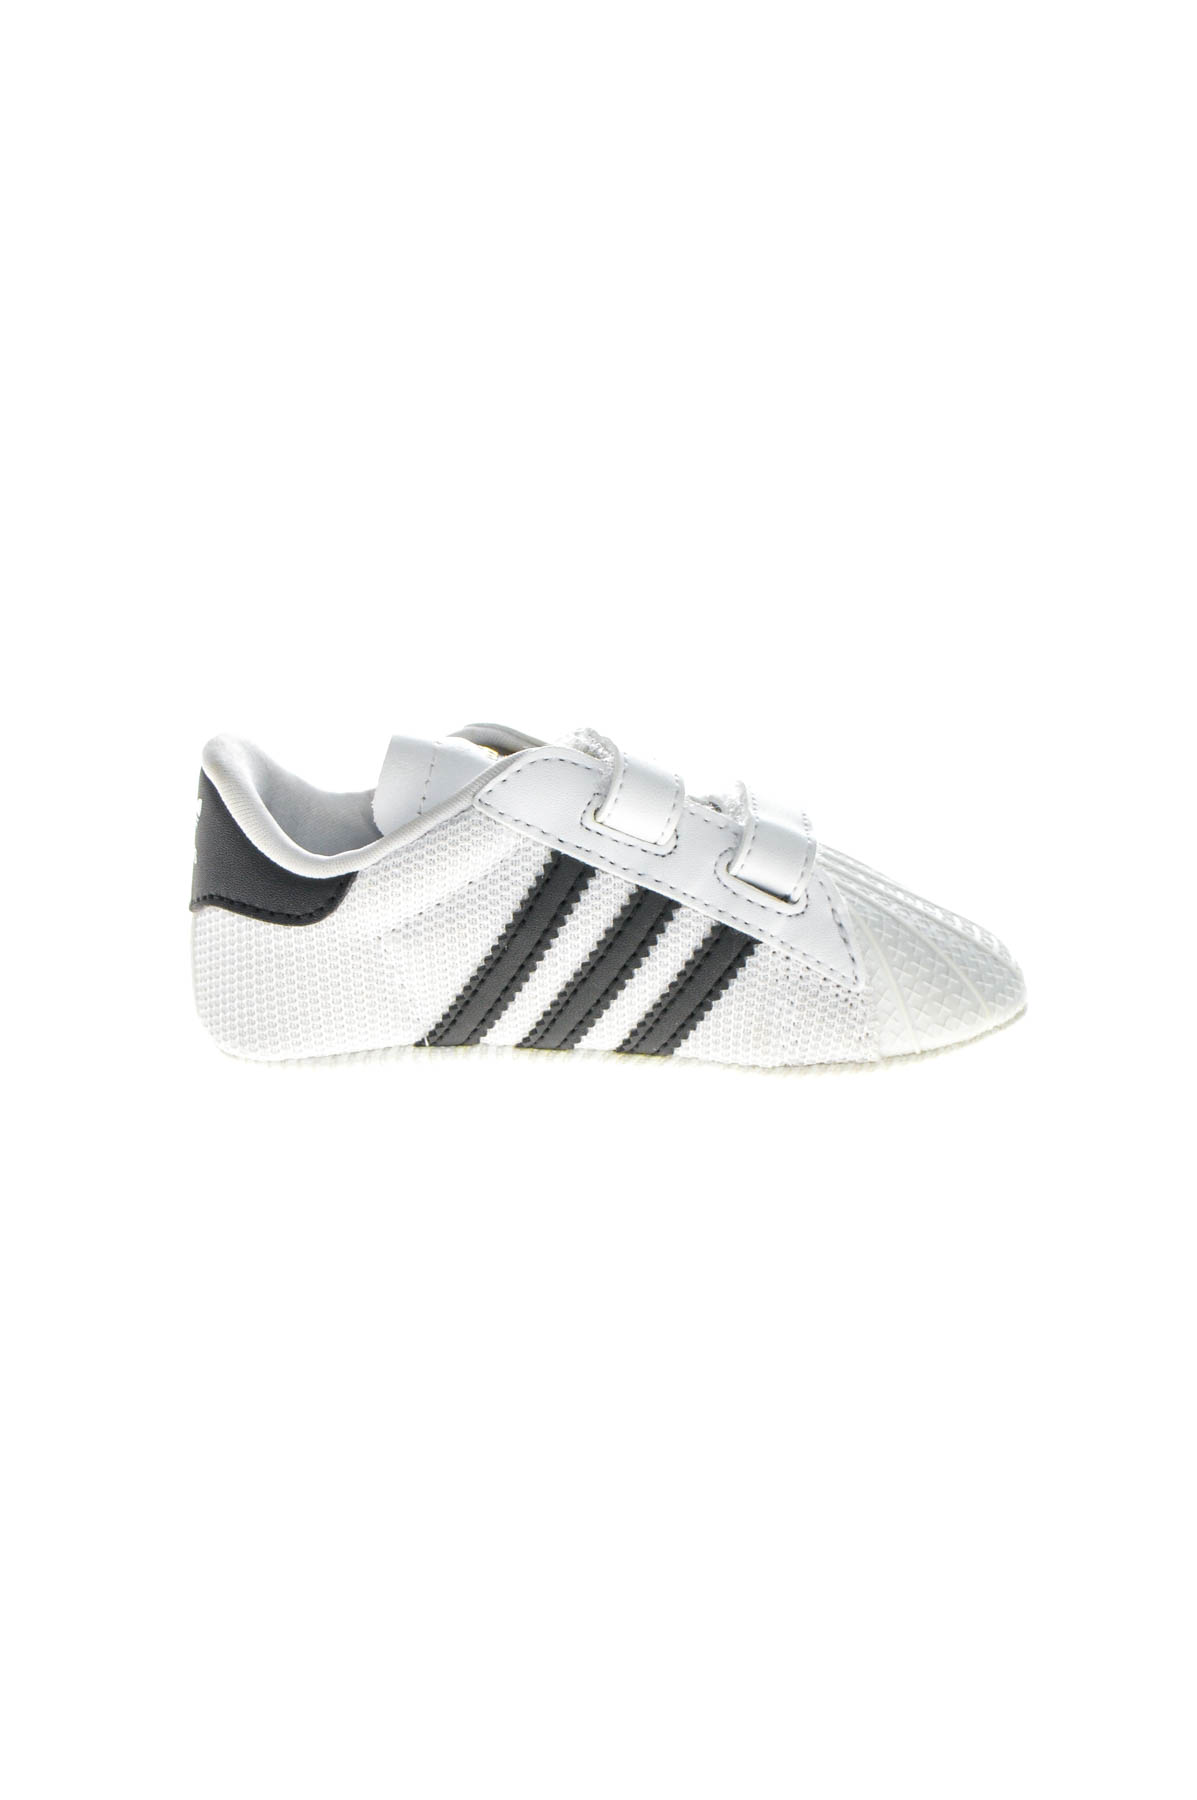 Baby boots - Adidas - 2